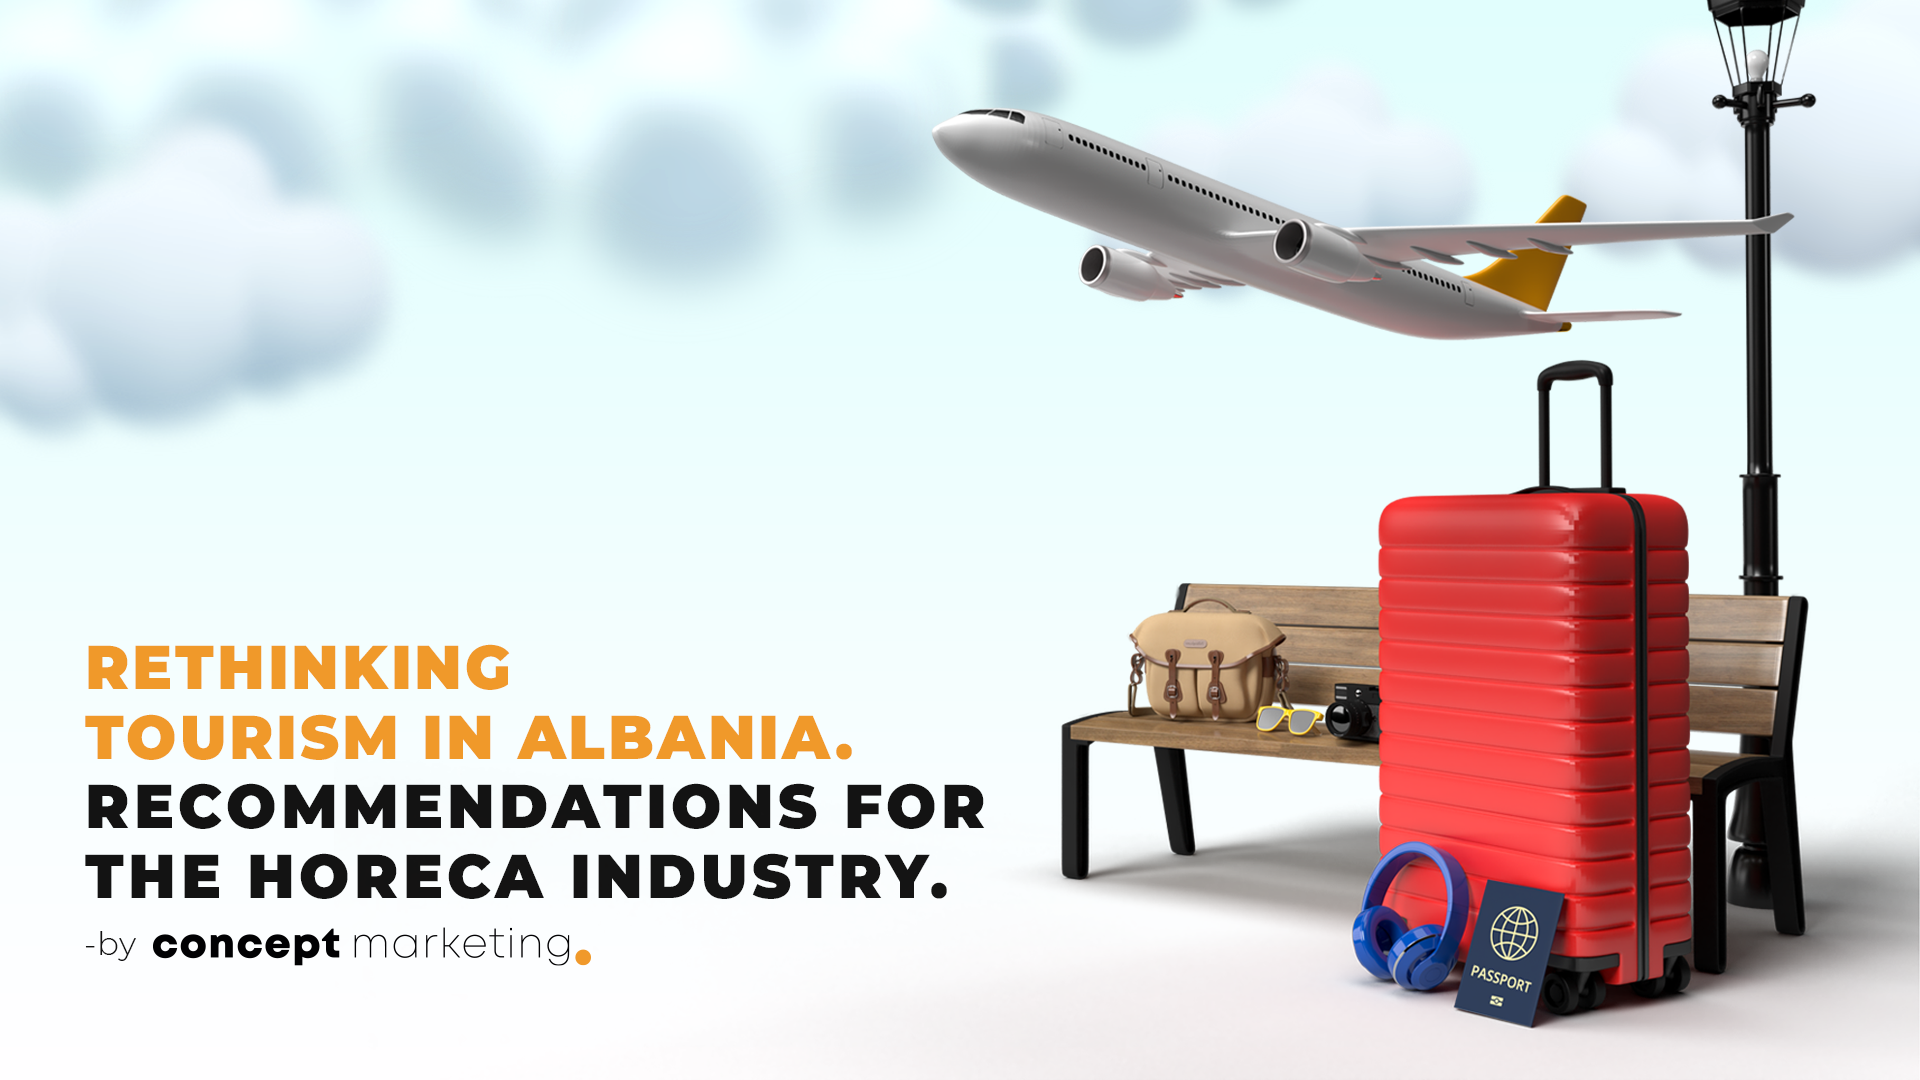 Rethinking tourism in Albania.  Recommendations for the HoReCa industry.